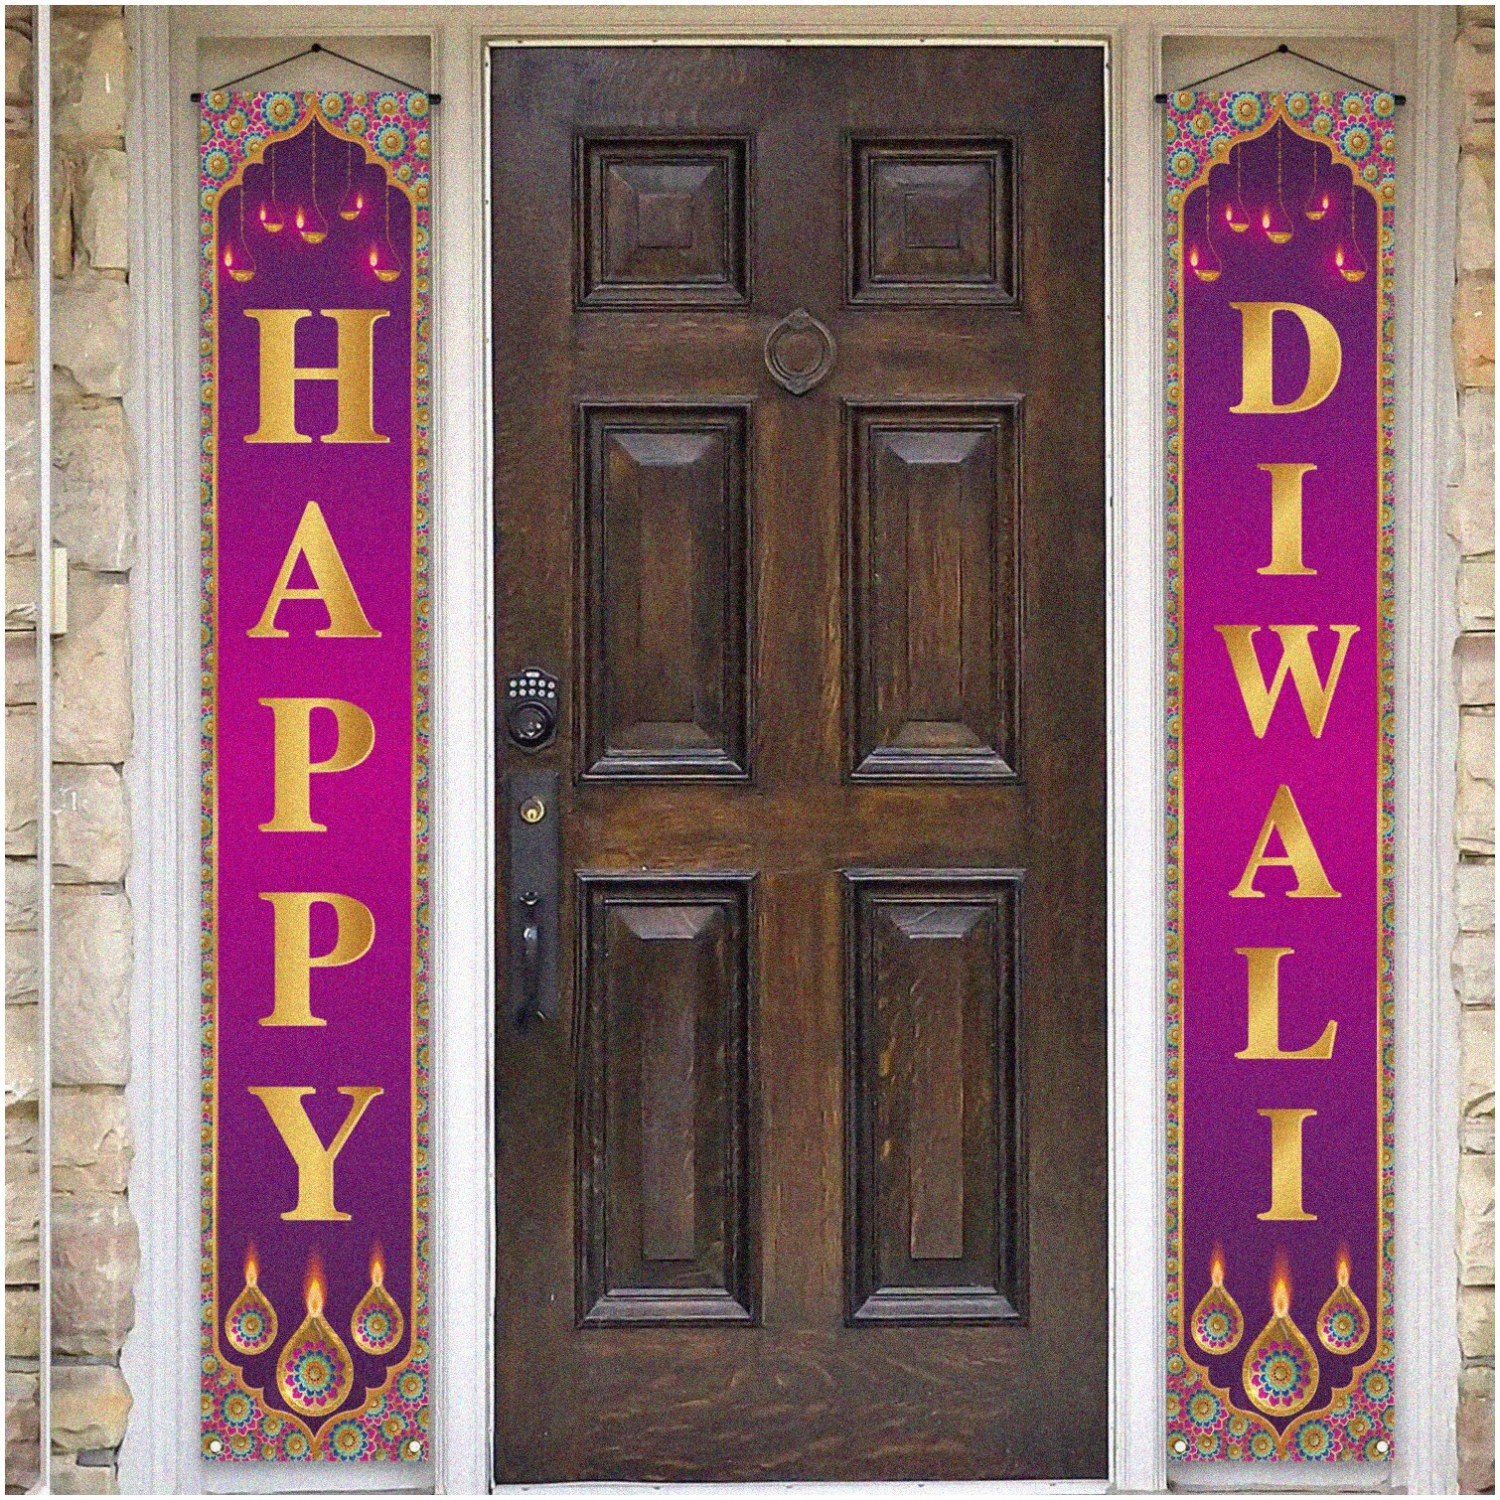 Luminous Diwali Delight Porch Banner - Festive Deepavali Lights for Holiday Party, Front Door Wall Hanging Decoration